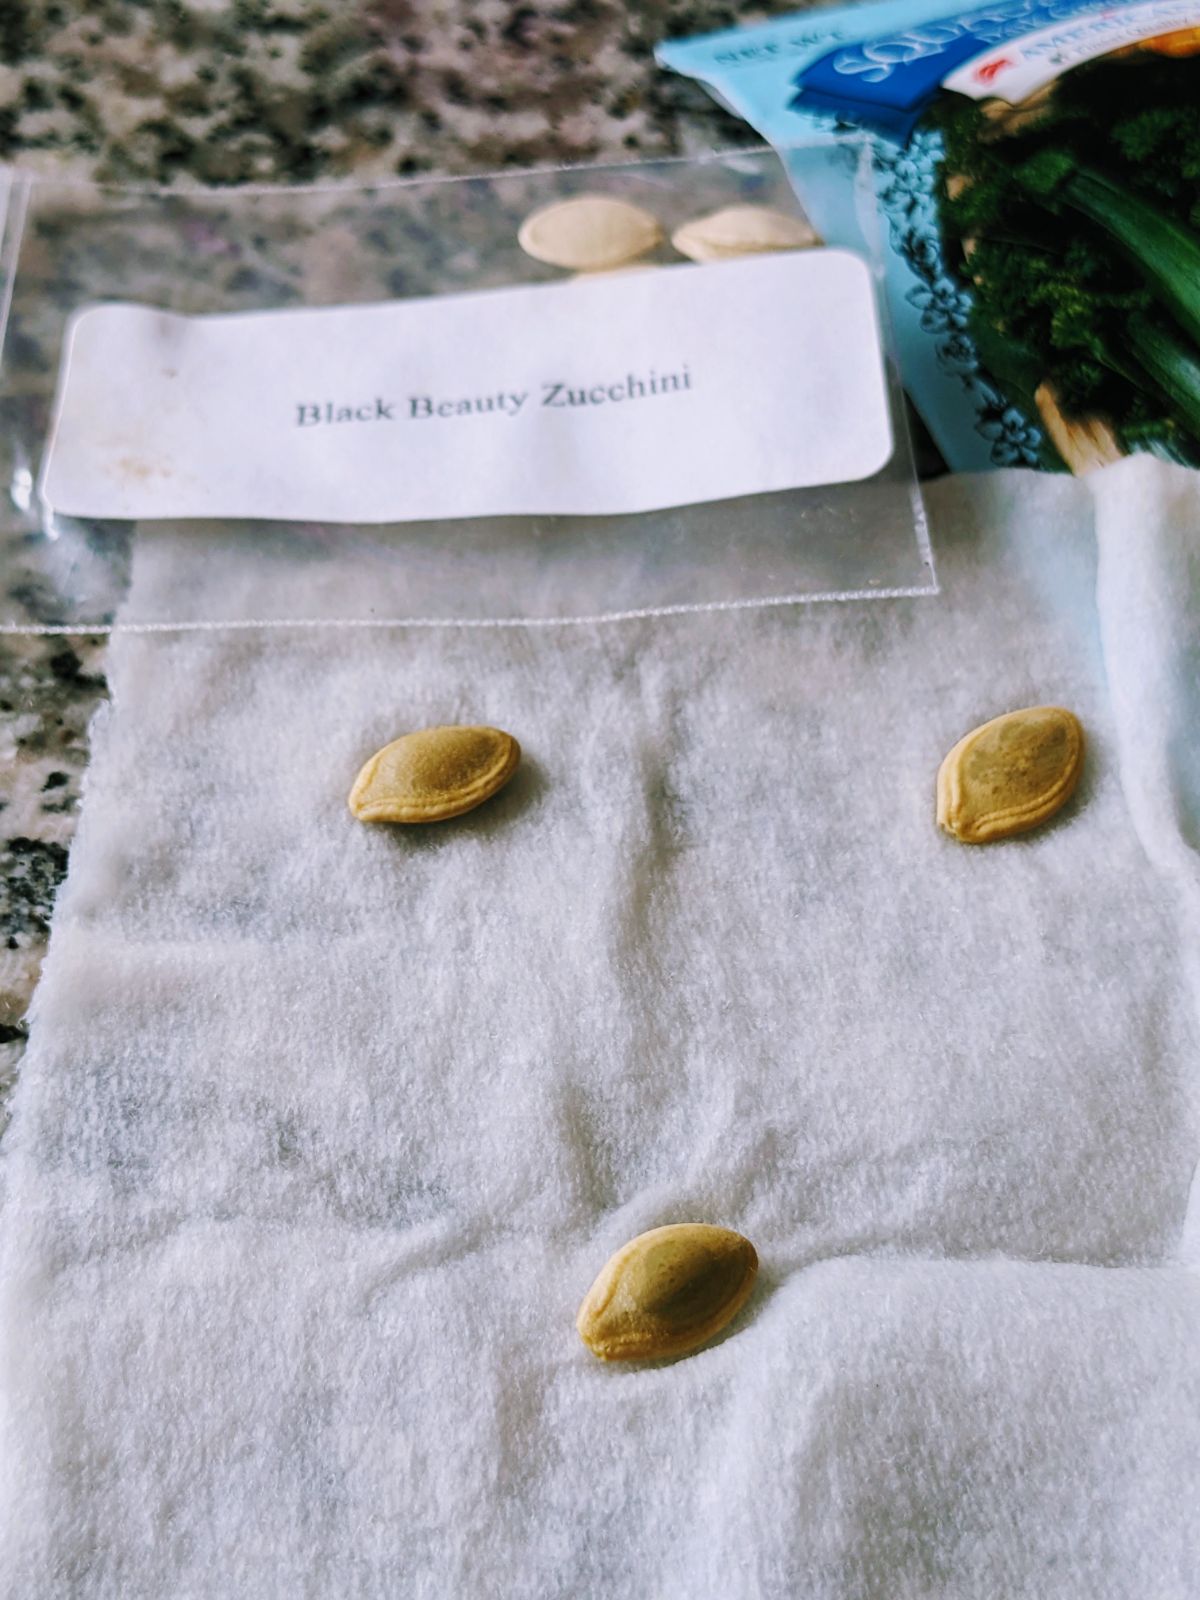 Germinating zucchini seeds in paper towels